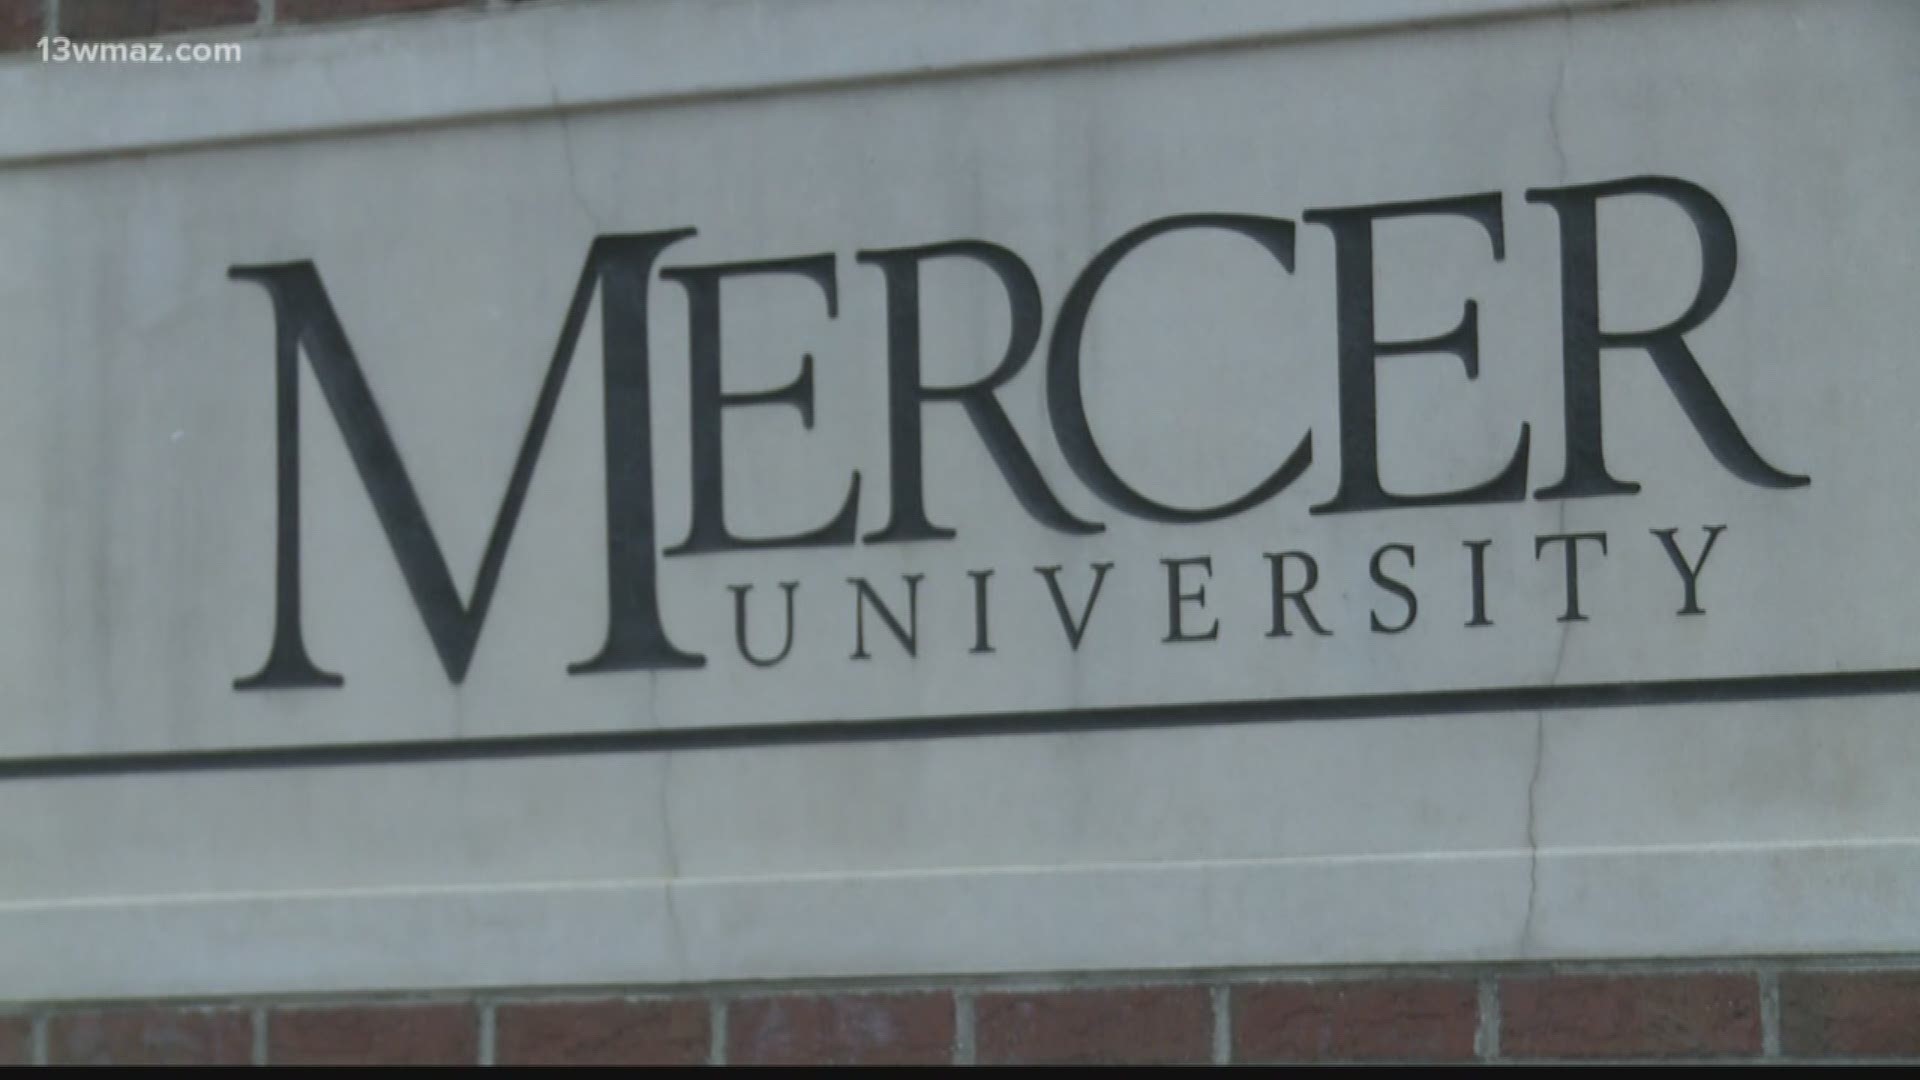 Mercer University is allowing students to choose whether or not they want to attend classes in-person amid the COVID-19 outbreak. Some students aren't happy with it.